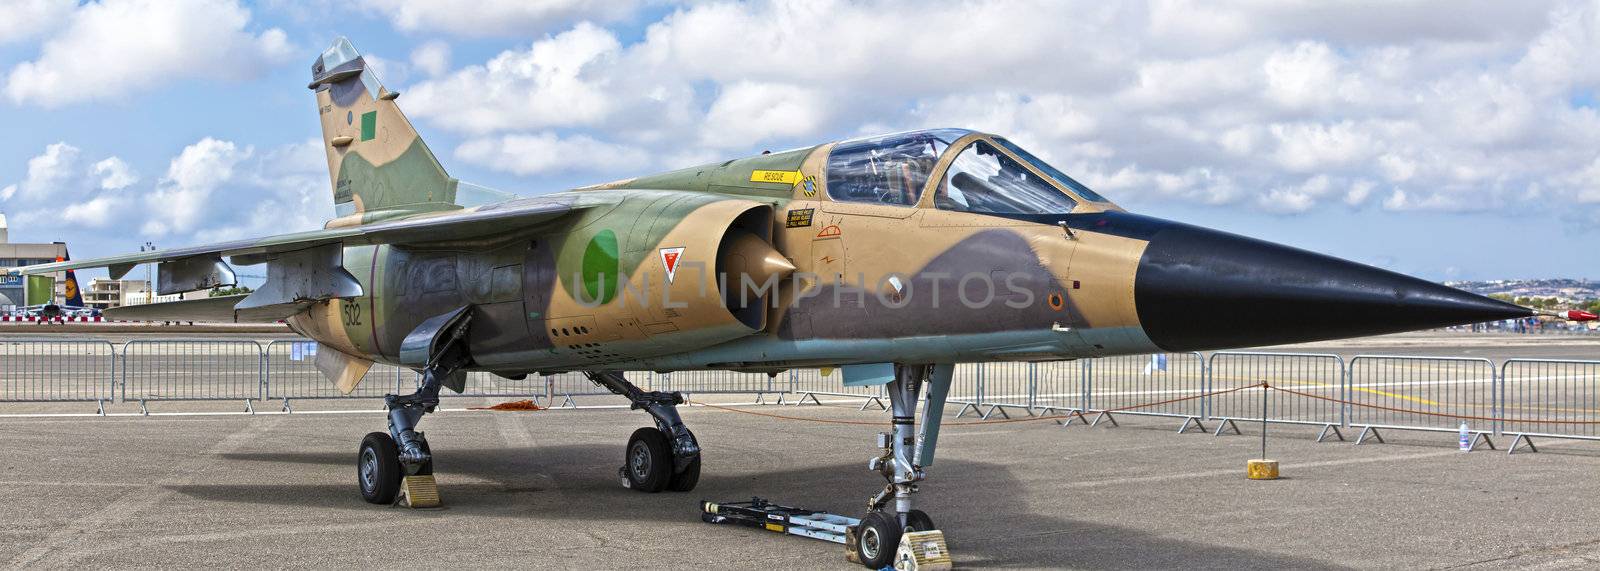 Libyan Air Force Mirage F1 Reg 502 by PhotoWorks